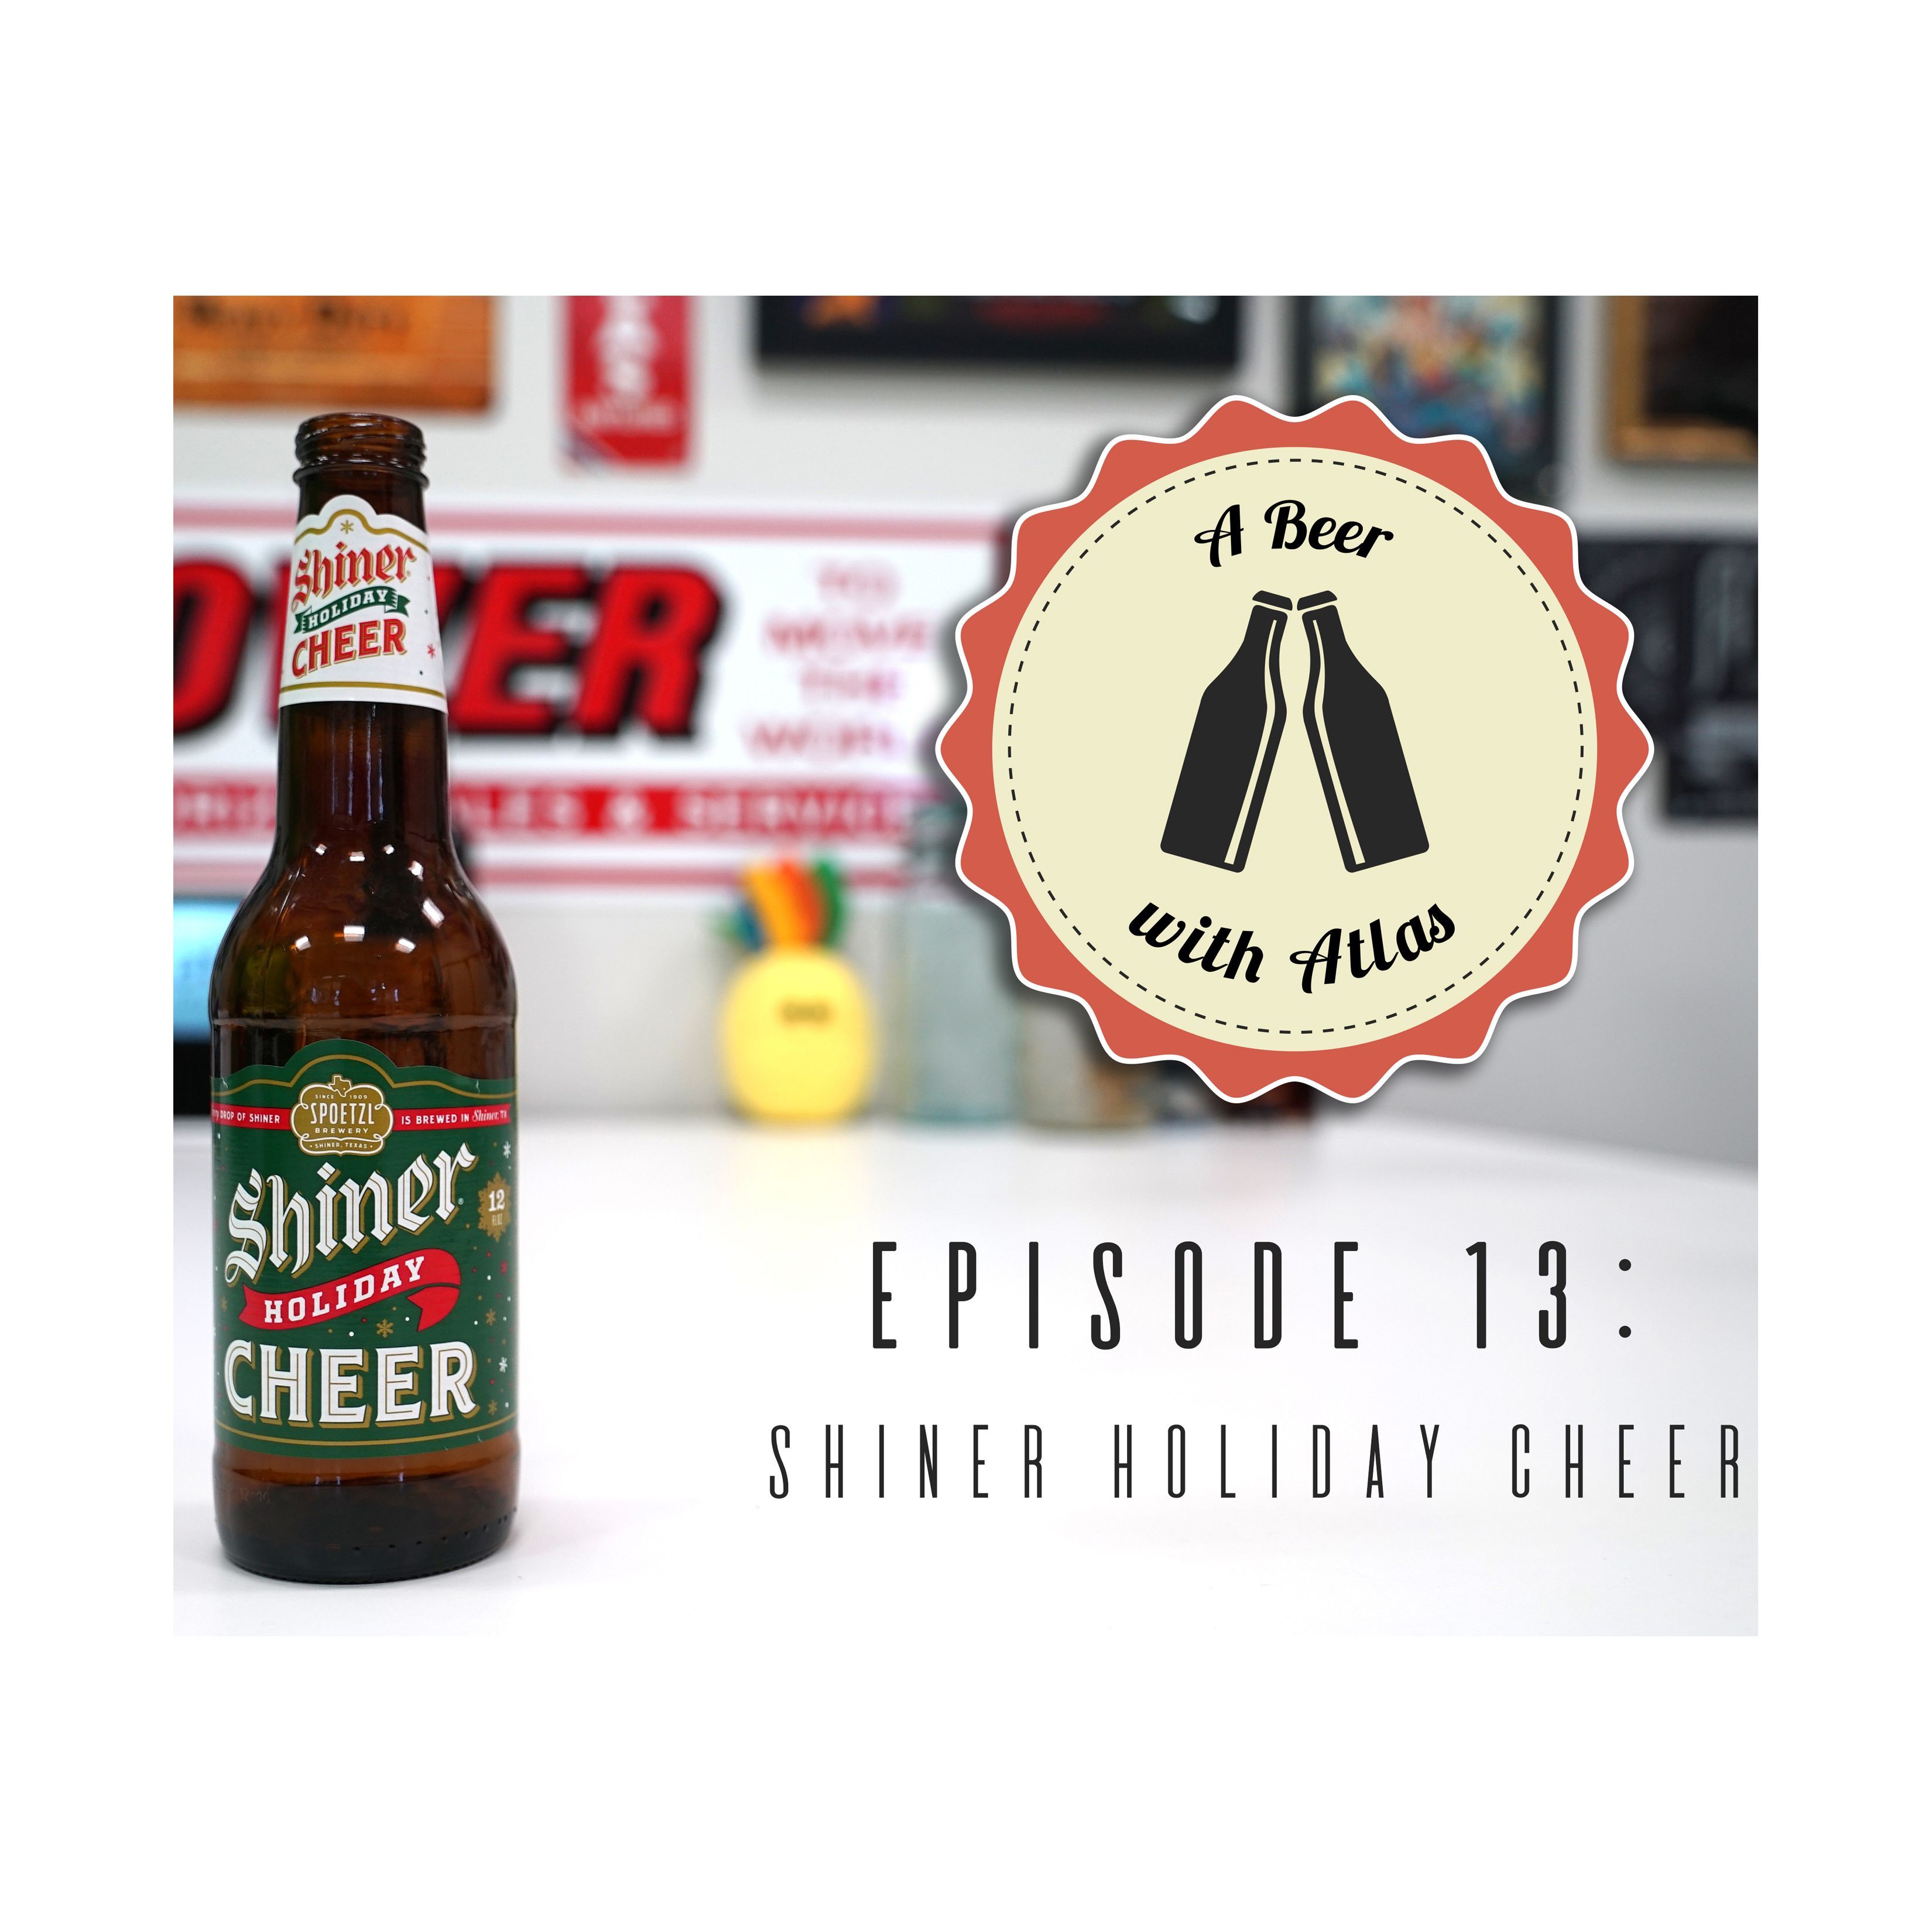 A Beer With Atlas #13 - Spoetzl's Shiner Holiday Cheer